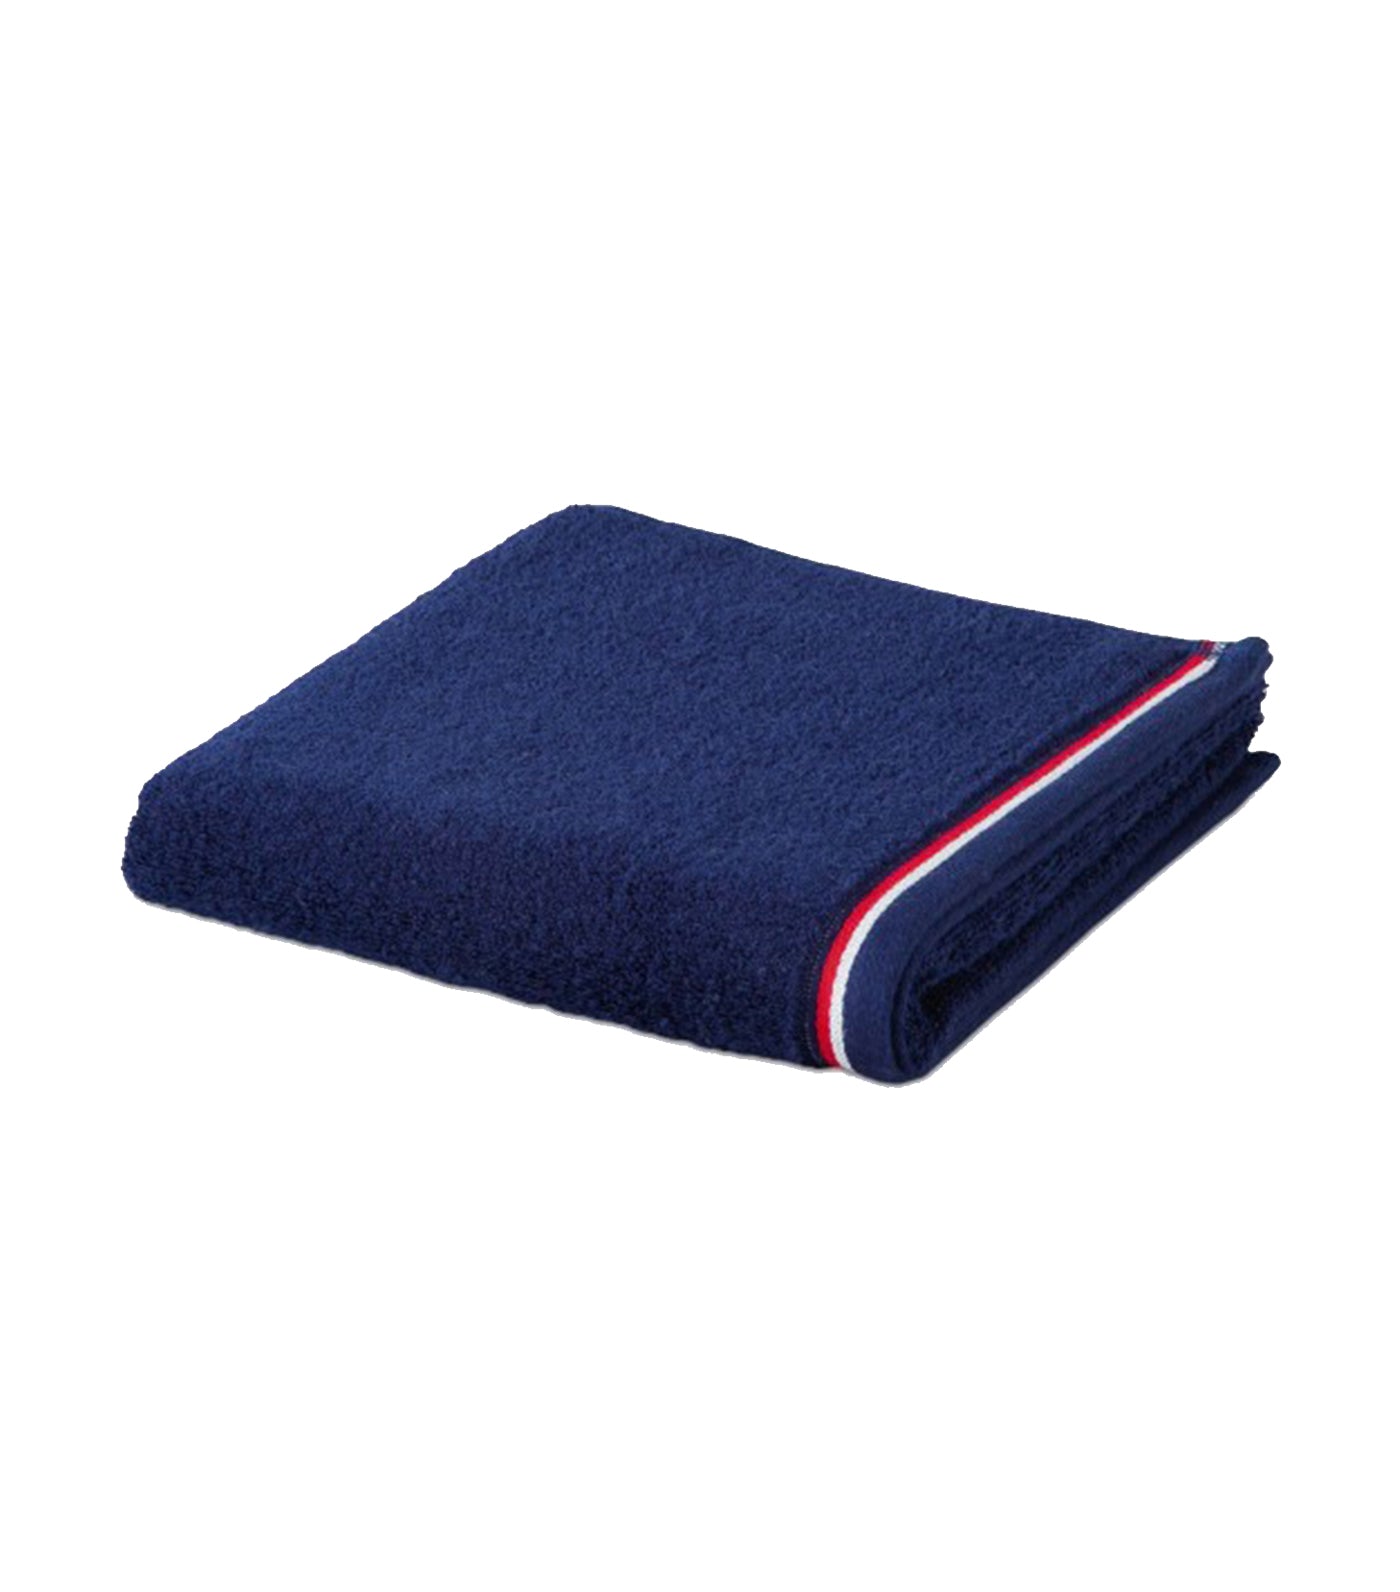 möve athleisure collection, navy blue - bath and shower towel